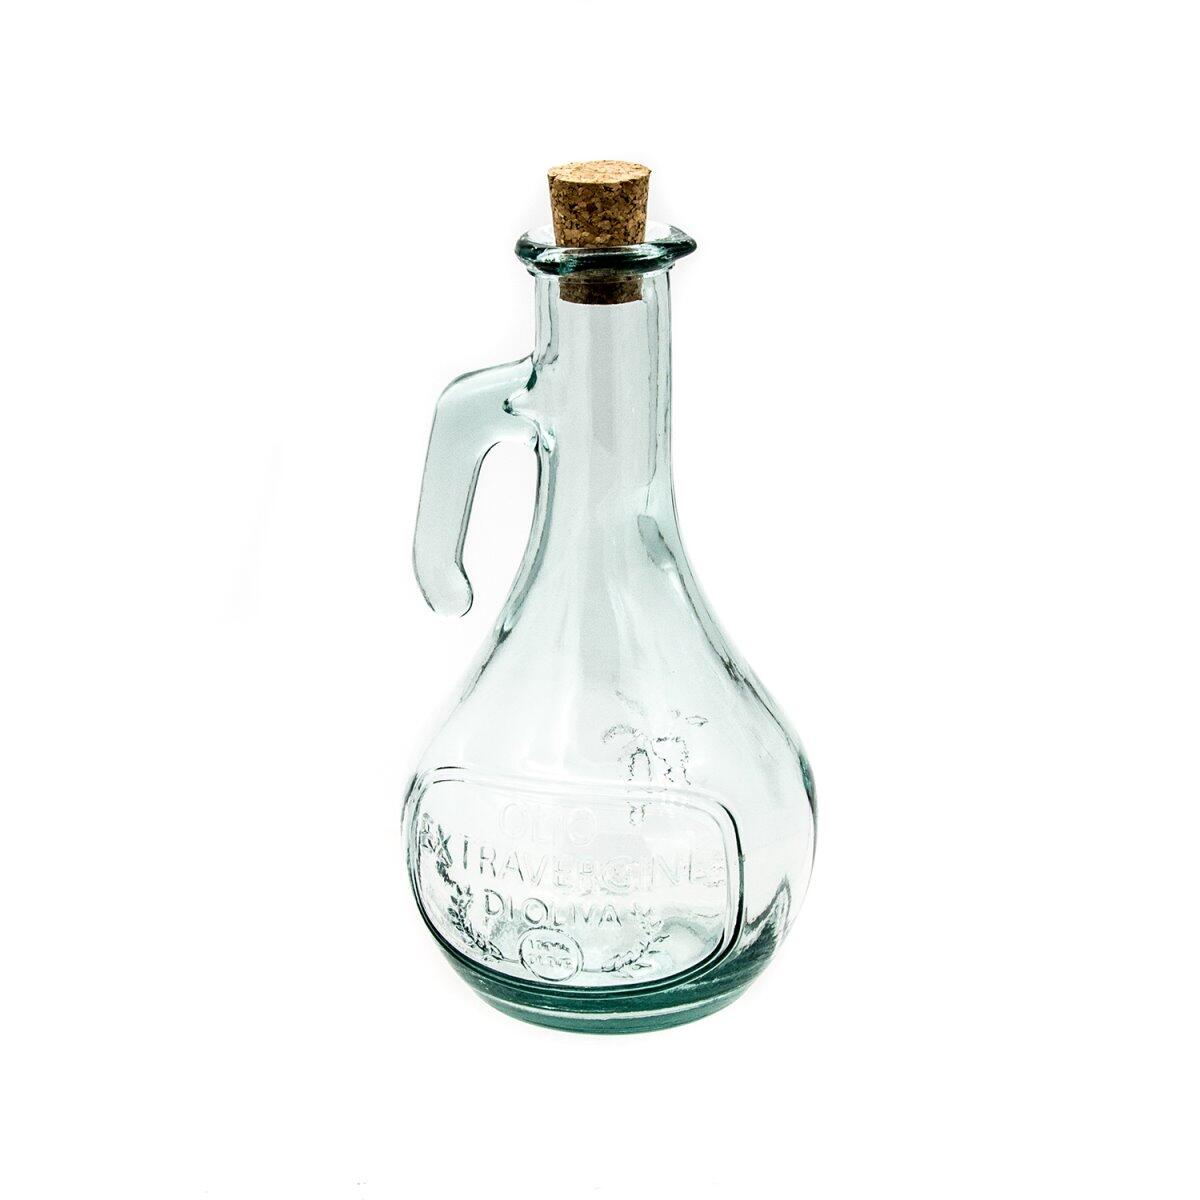 Sanmiguel Olio Oil Bottle with Handle 0.5 Liter